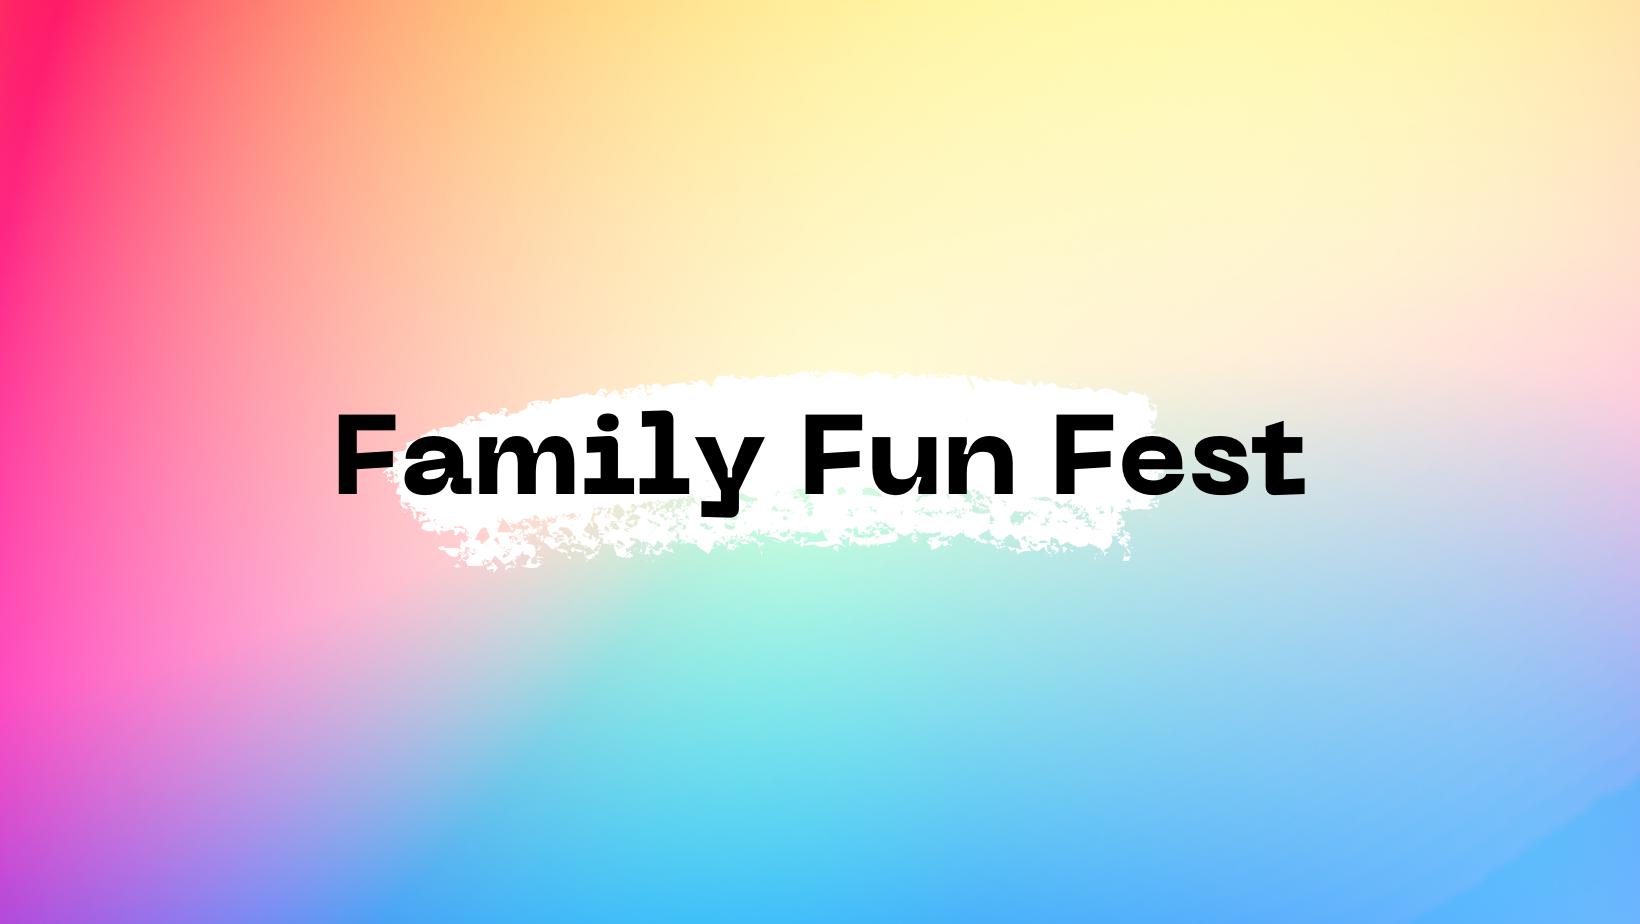 Colorful ad for Family Fun Fest